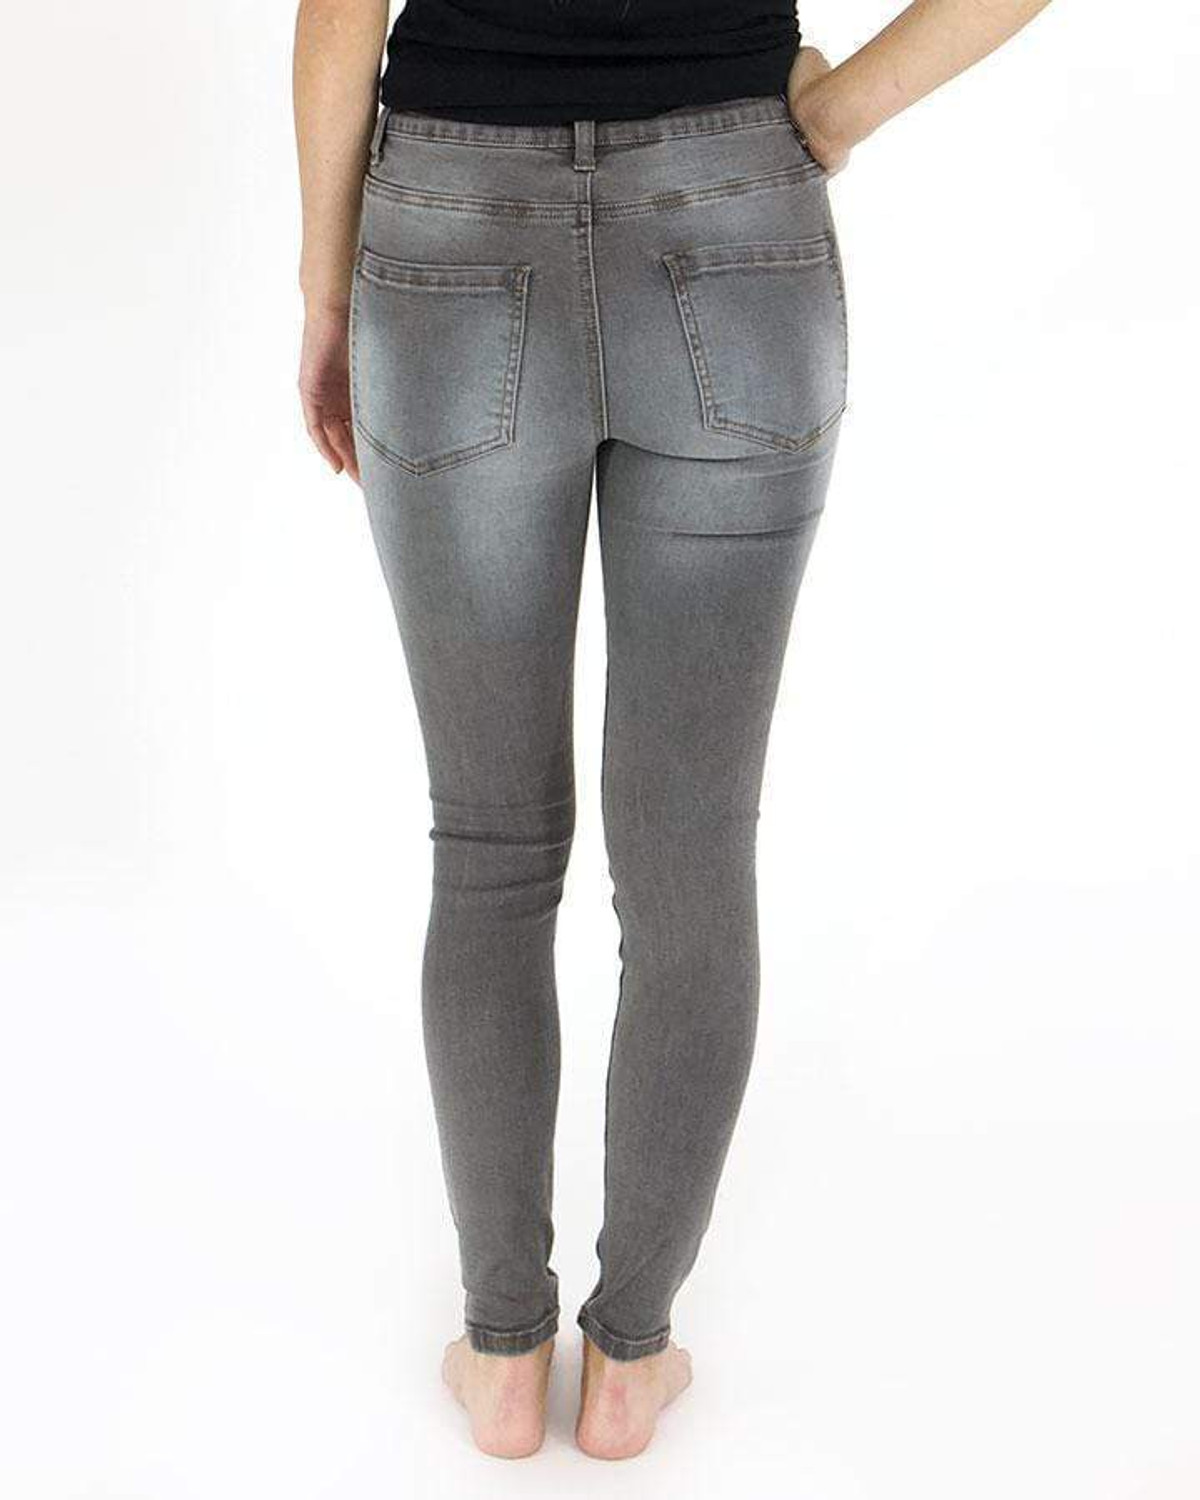 Grace and Lace Button Fly Distressed Jeggings - Grey